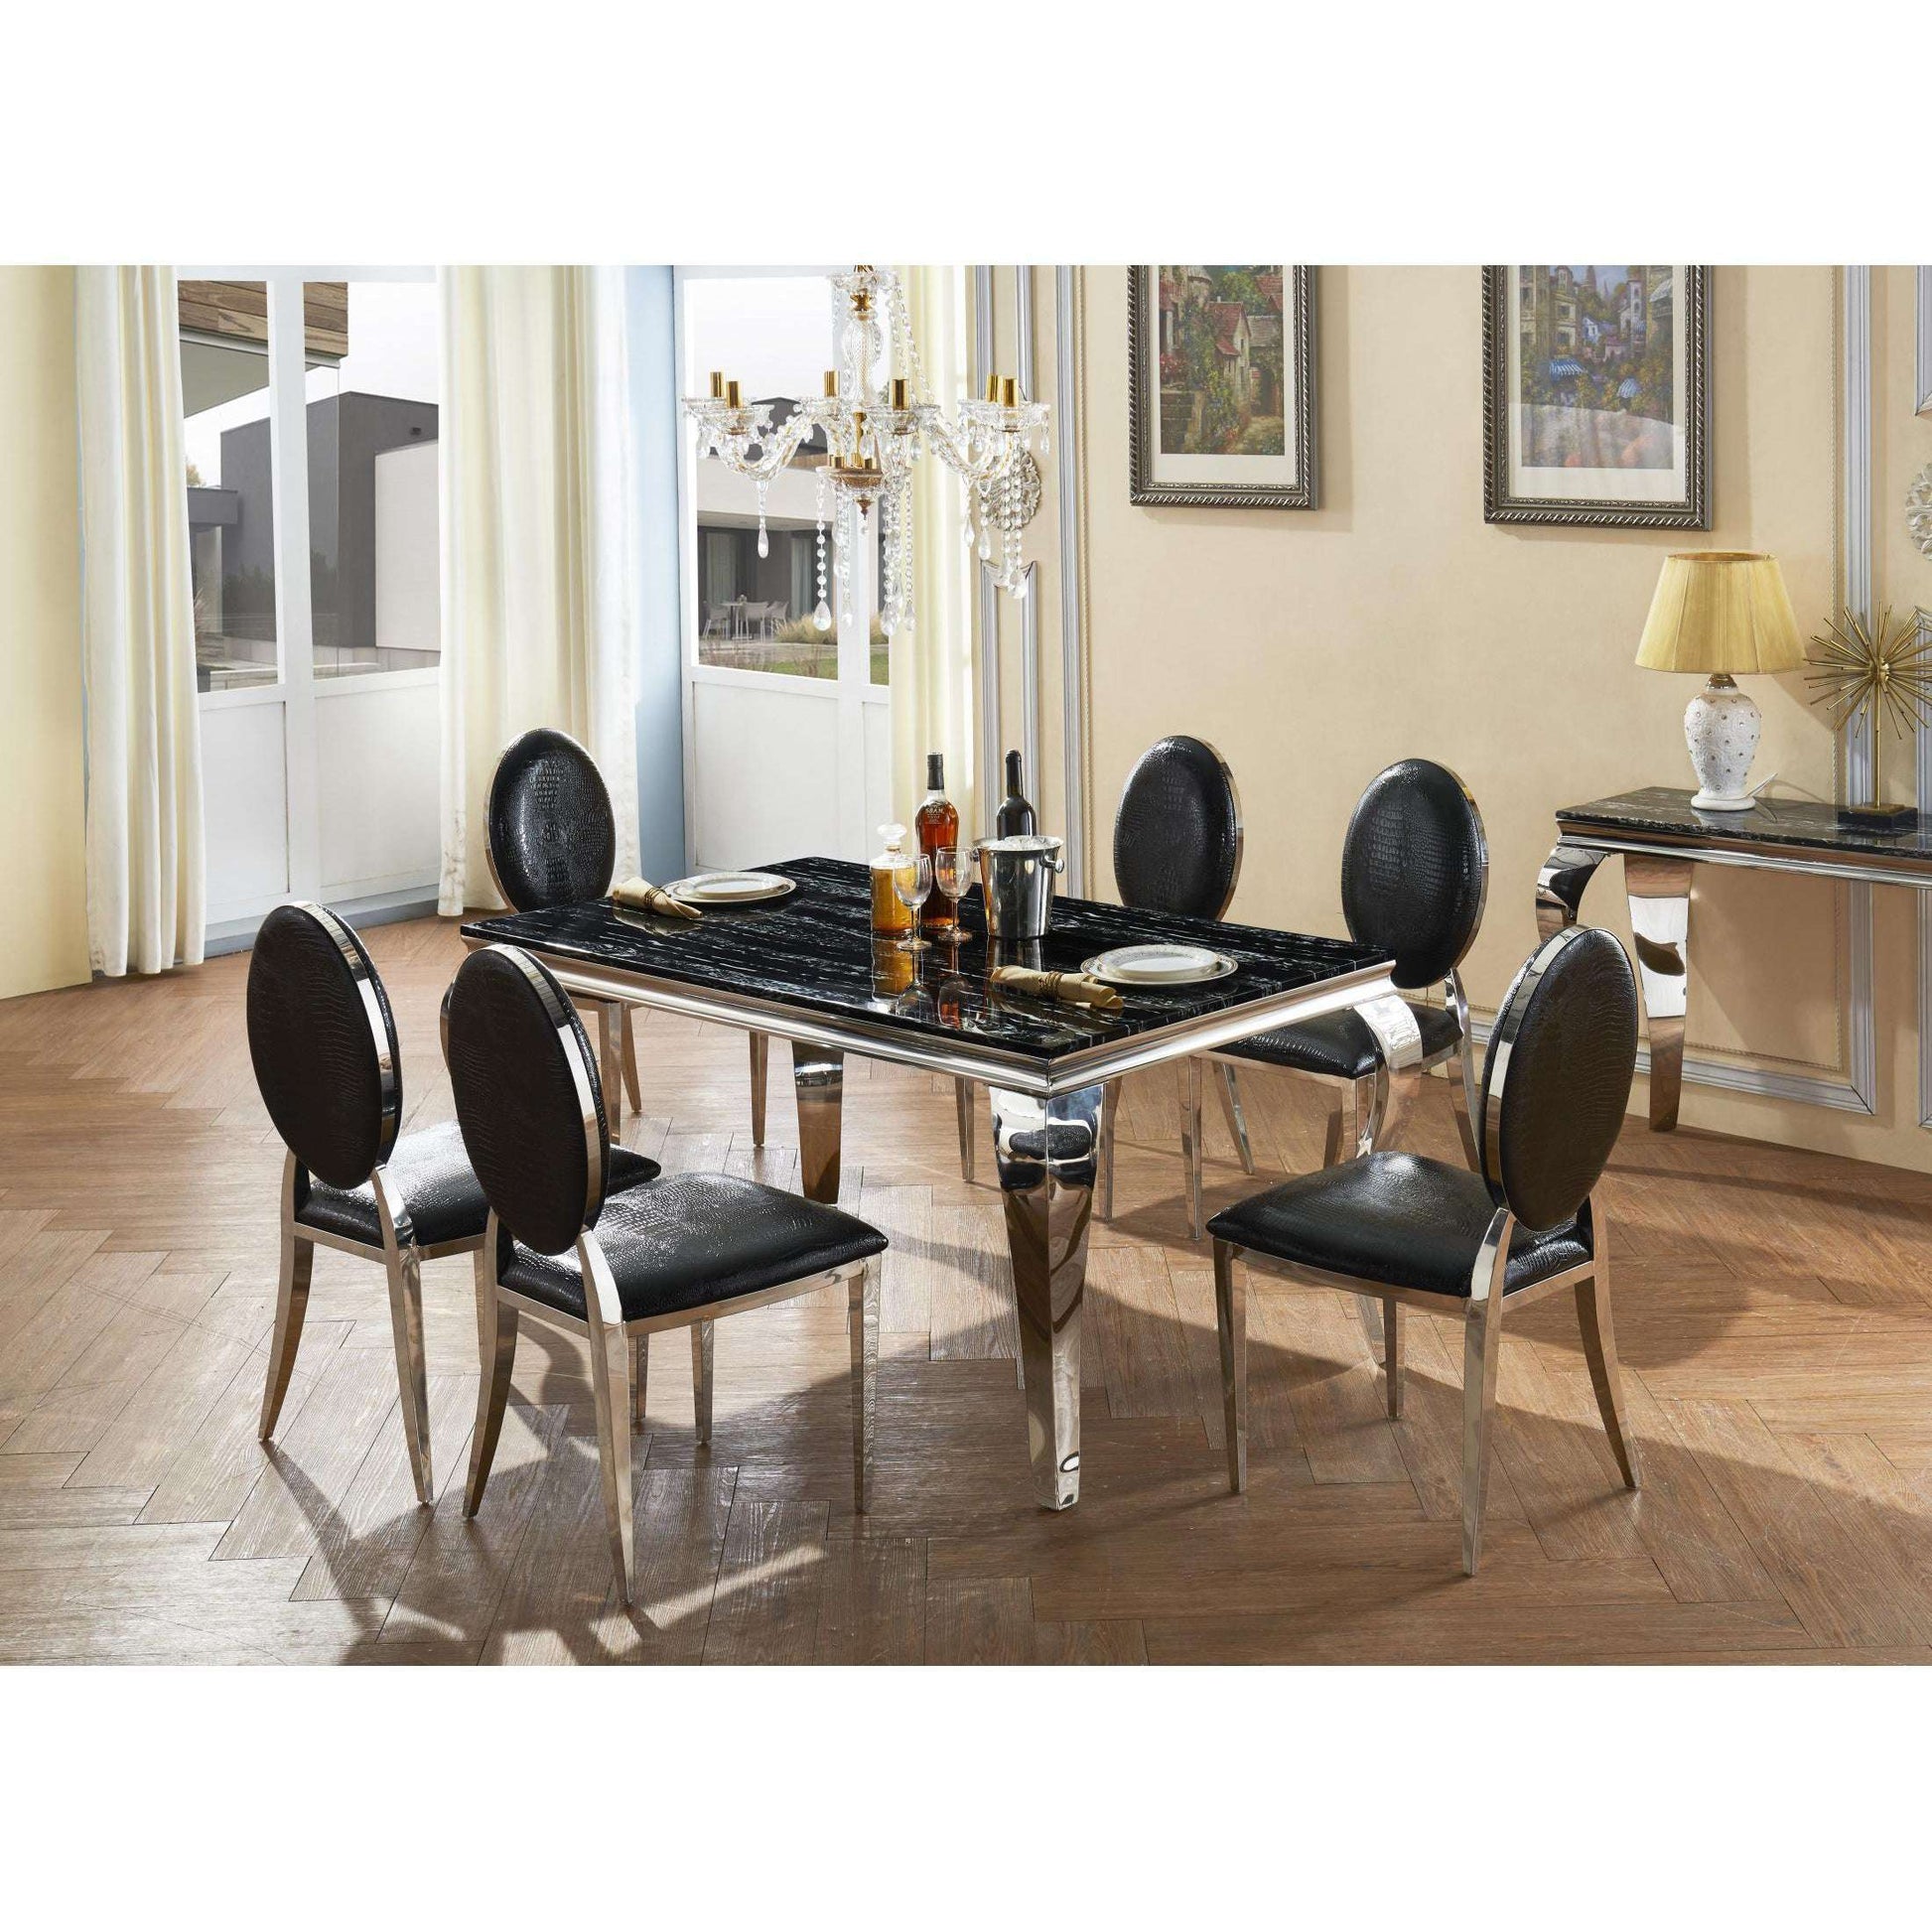 Ashpinoke:Arriana Marble Dining Table with Stainless Steel Base,Dining Tables,Heartlands Furniture